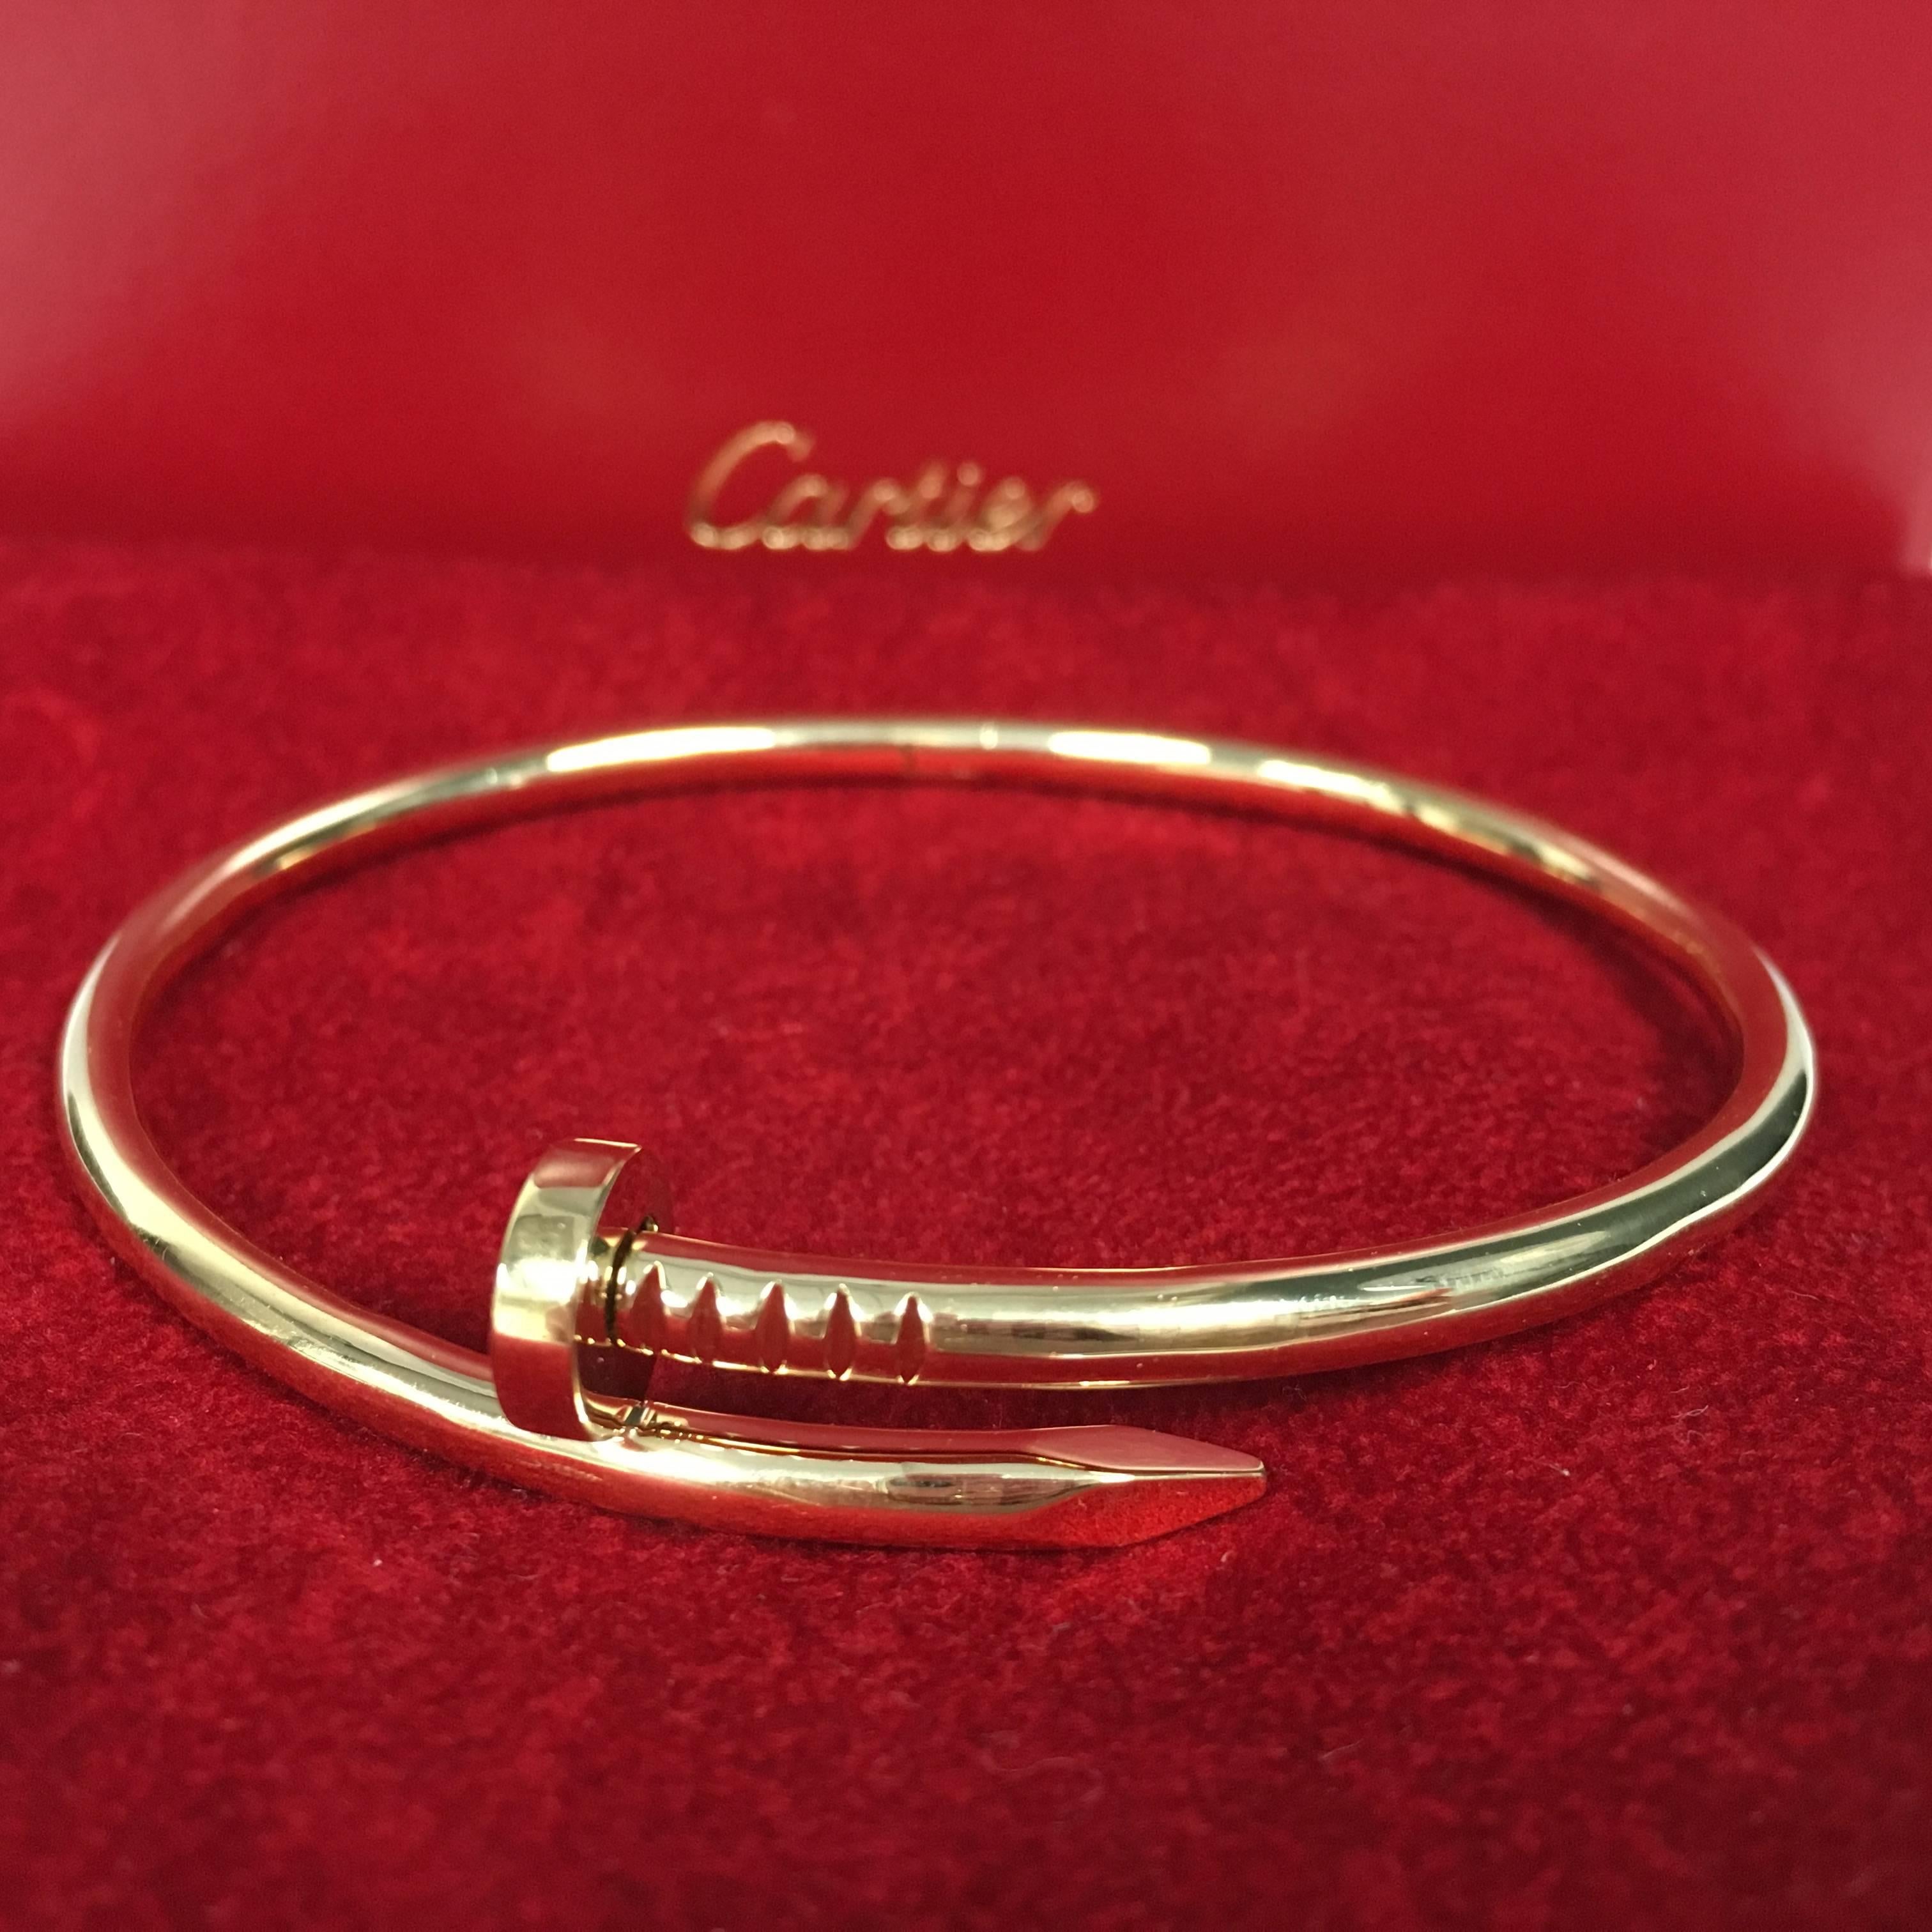 18K yellow gold Cartier nail bracelet. 
Hard to find, size: 21 (Large)
MARKINGS:	Cartier, 750, ©, Cartier Hallmark, (Serial Number), (Size)
Condition: Excellent, like new. Cartier red pouch included. 
An unhindered transformation with a